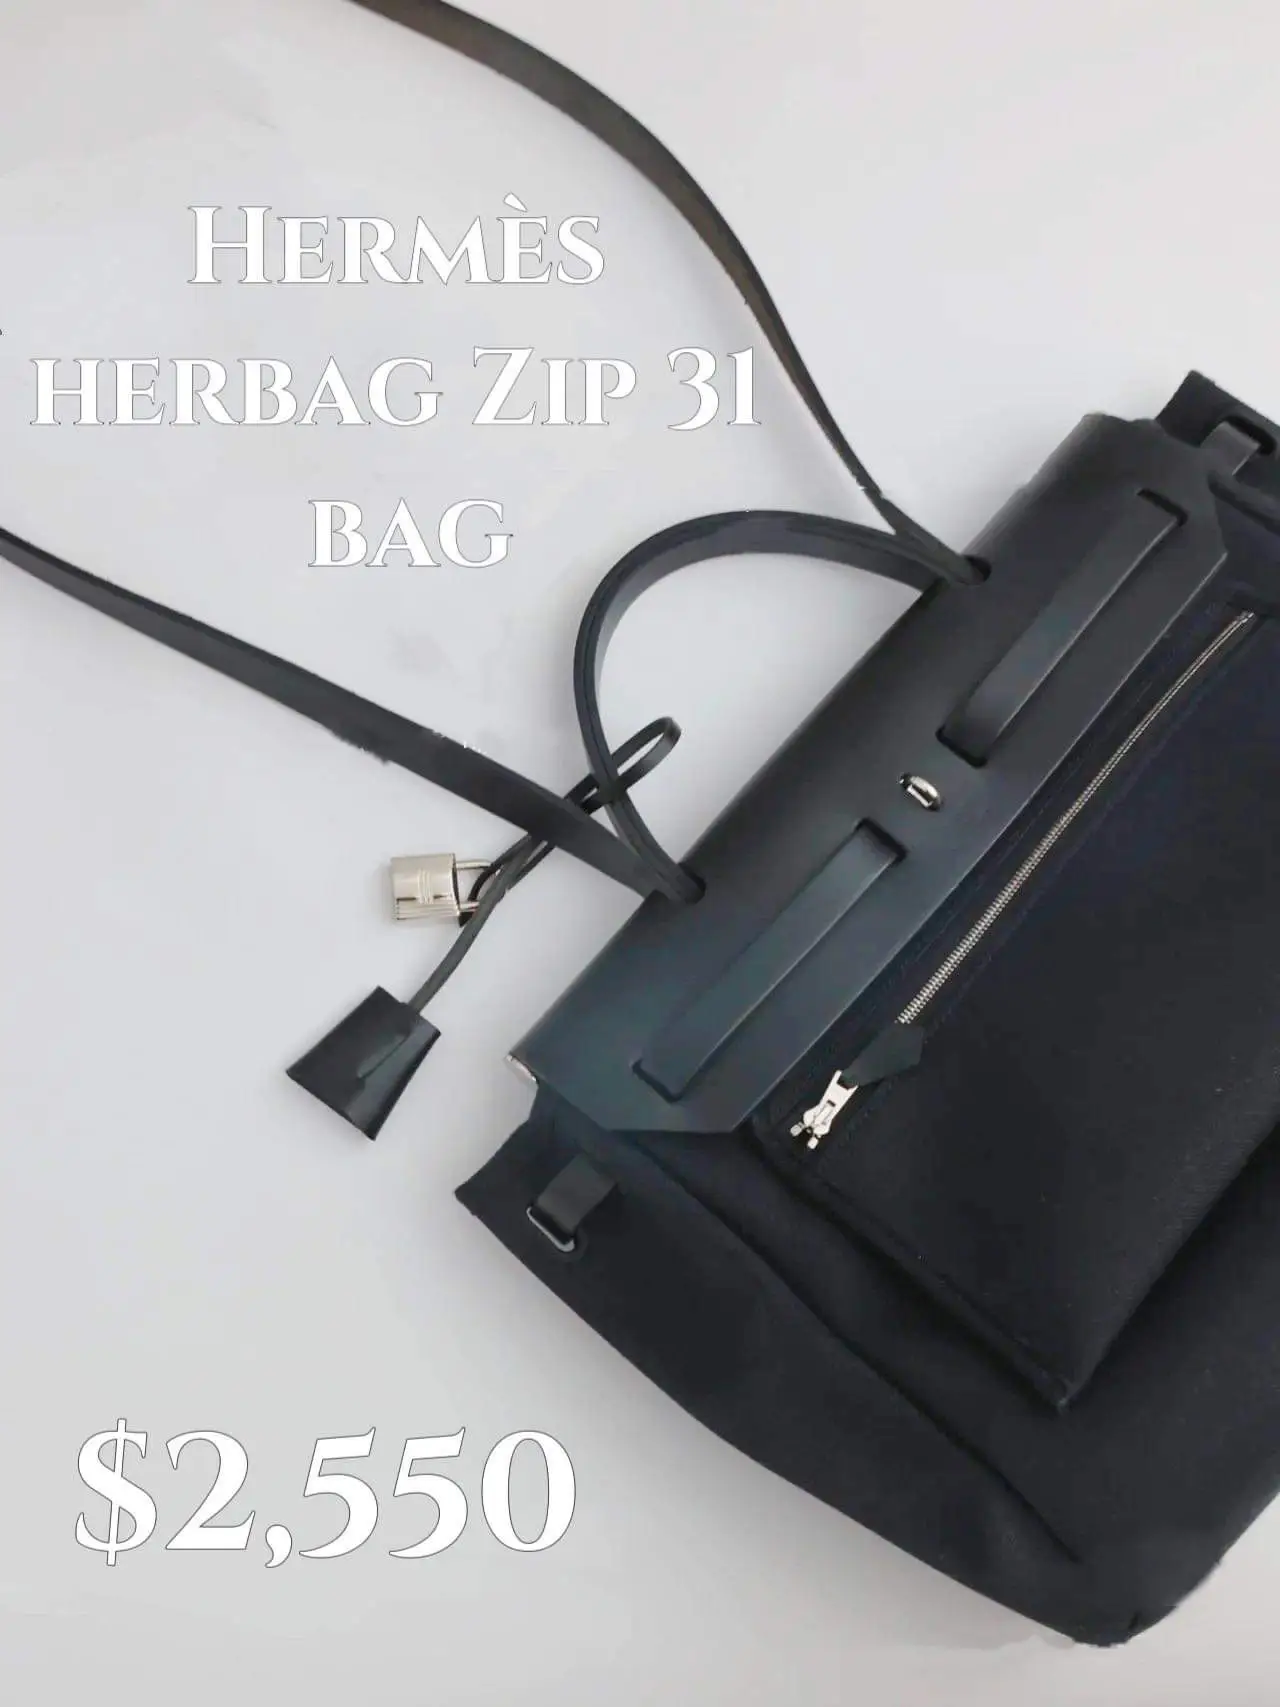 Hermes herbag 31 Review  Everything you need to know about Hermes herbag 